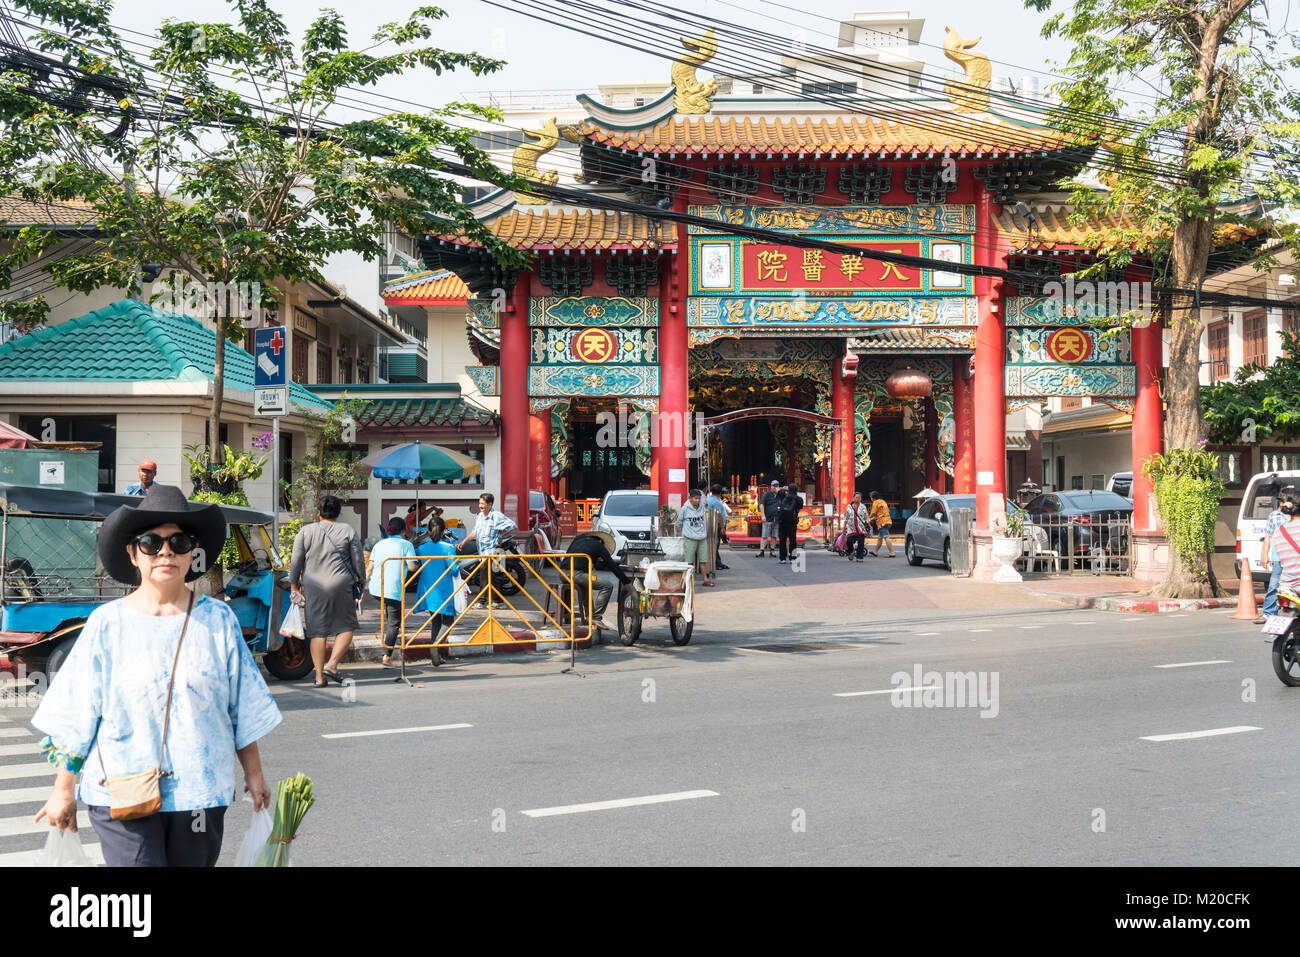 A view of the entrance gate of Chinese temple in Chinatown, Bangkok, Thailand Stock Photo